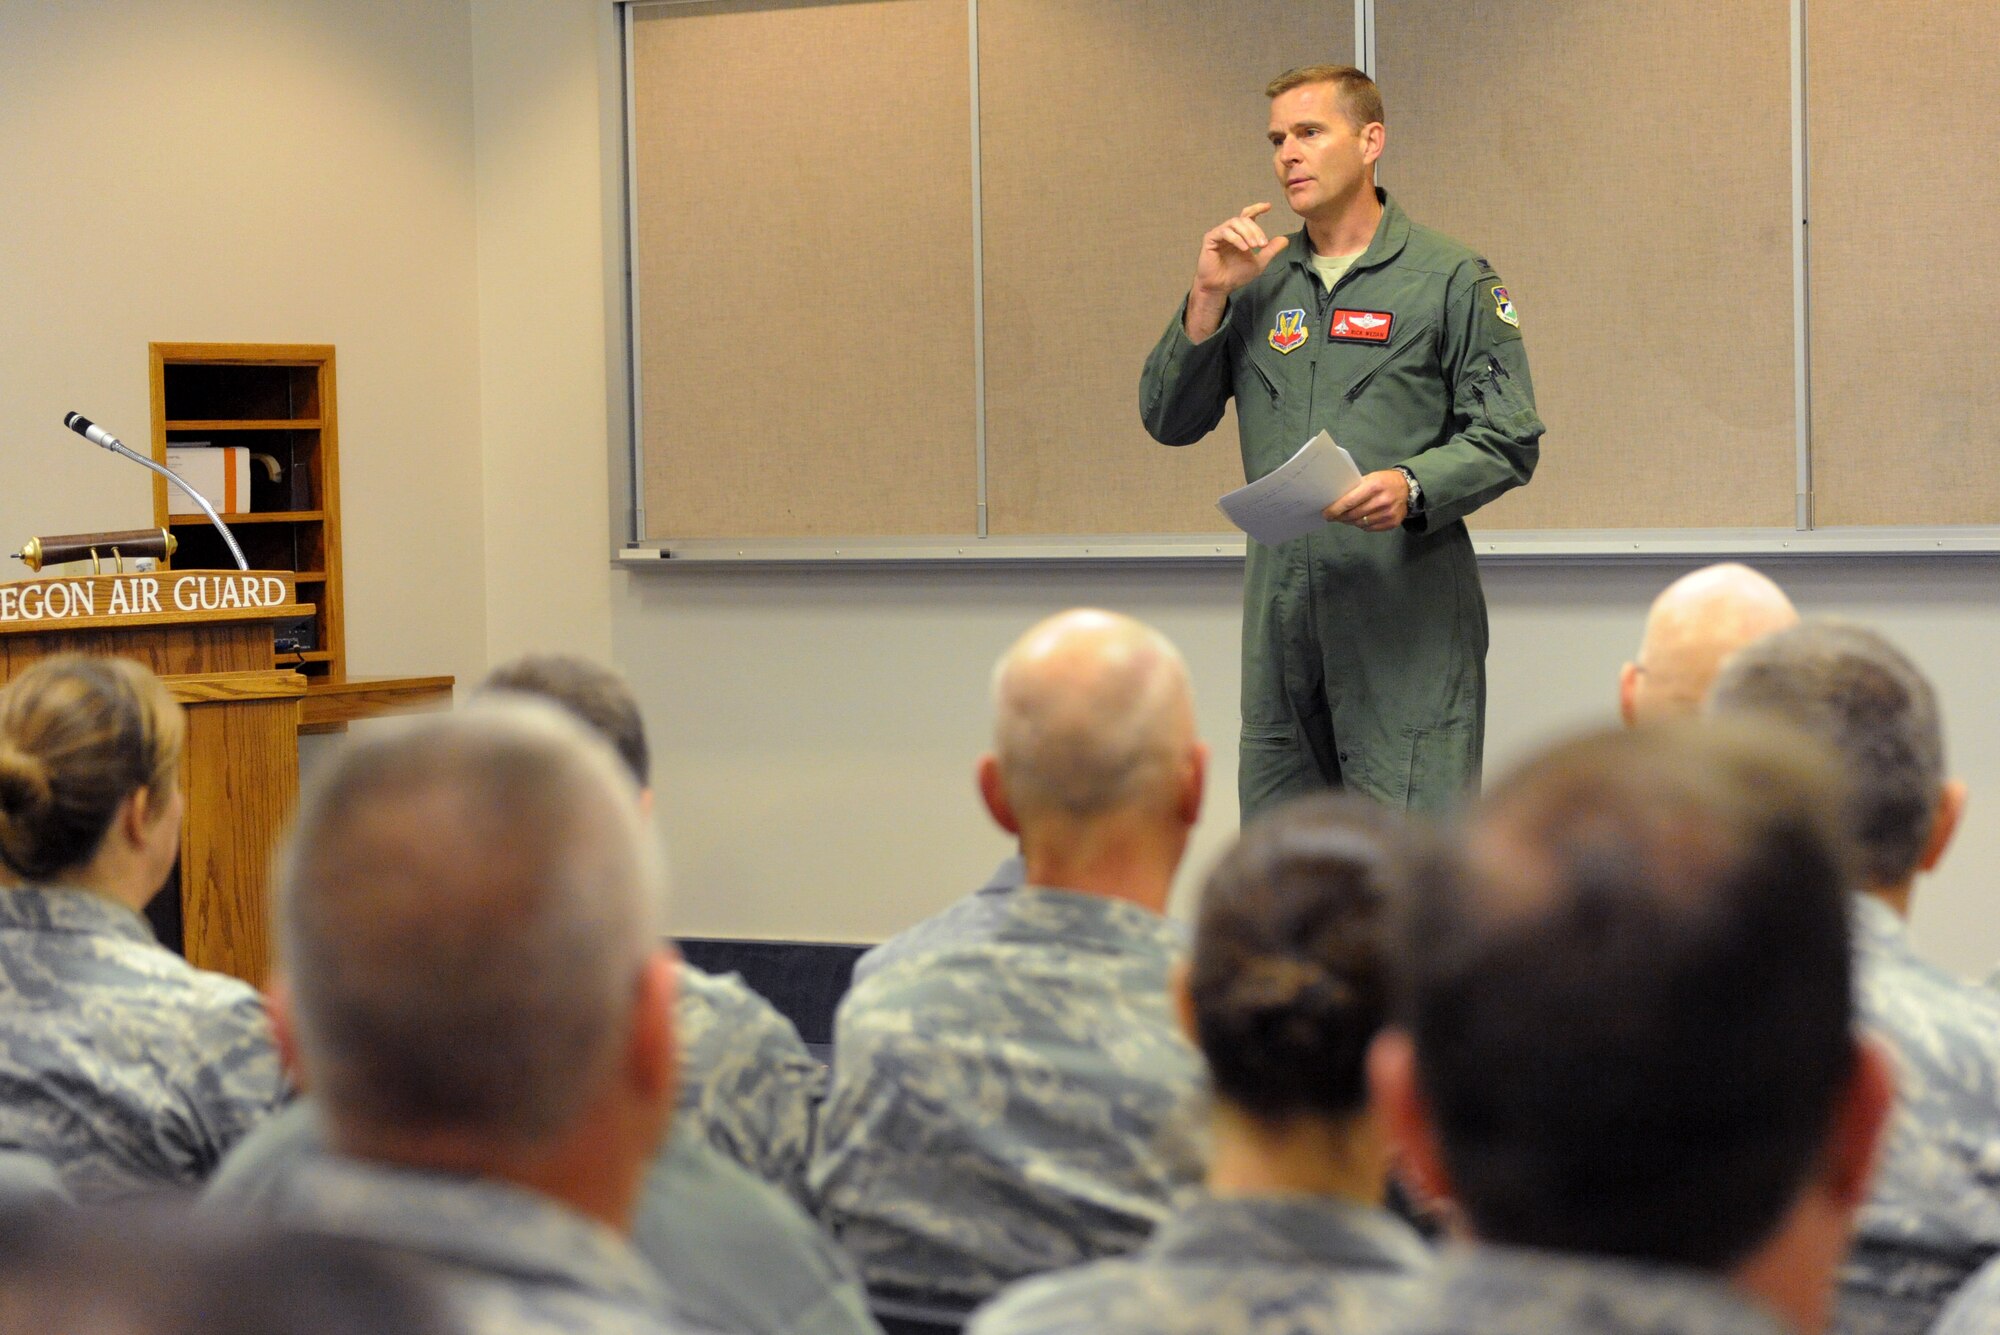 Oregon Air National Guard Col. Richard Wedan, 142nd Fighter Wing Commander, address Airmen of the 142nd Fighter Wing at the Portland Air National Guard Base, Ore., Oct. 8, 2013, during a Town Hall meeting to discuss the current conditions of the unit and members as a result of the U.S. Government shutdown.  (Air National Guard photo by Tech. Sgt. John Hughel, 142nd Fighter Wing Public Affairs/Released)